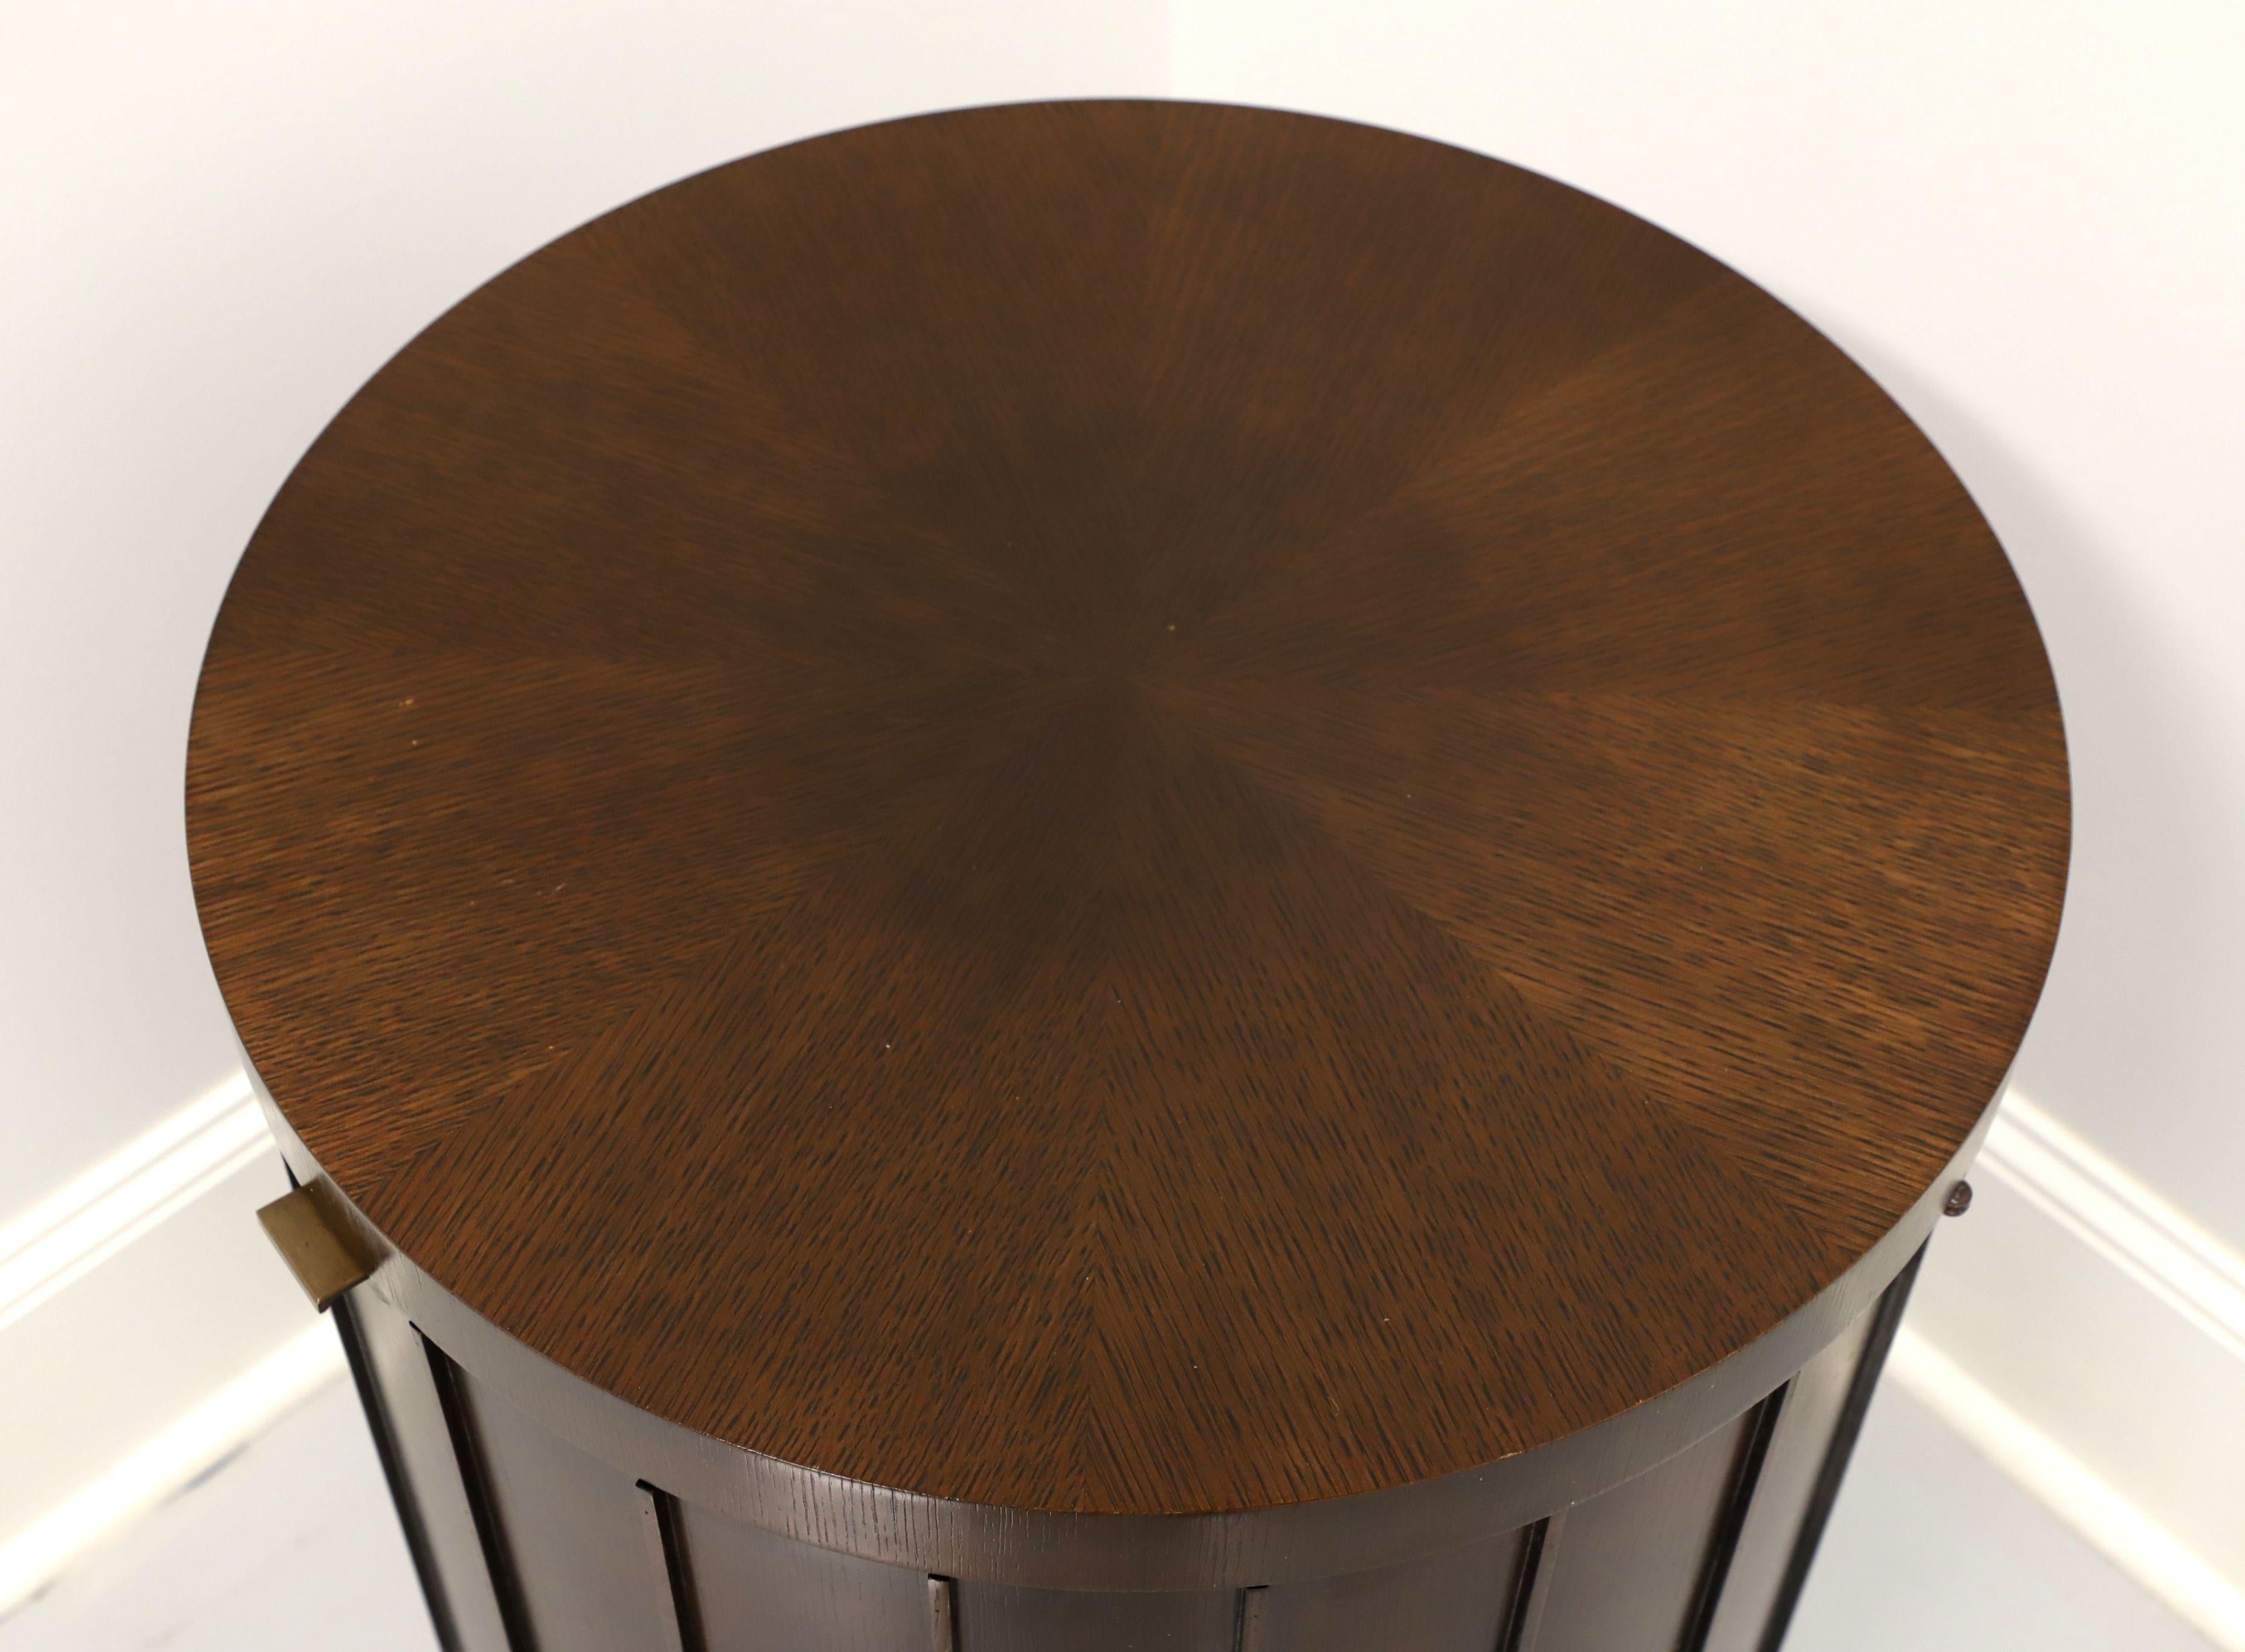 Brass Barbara Barry for Baker Contemporary Mahogany Round Cabinet Accent Table